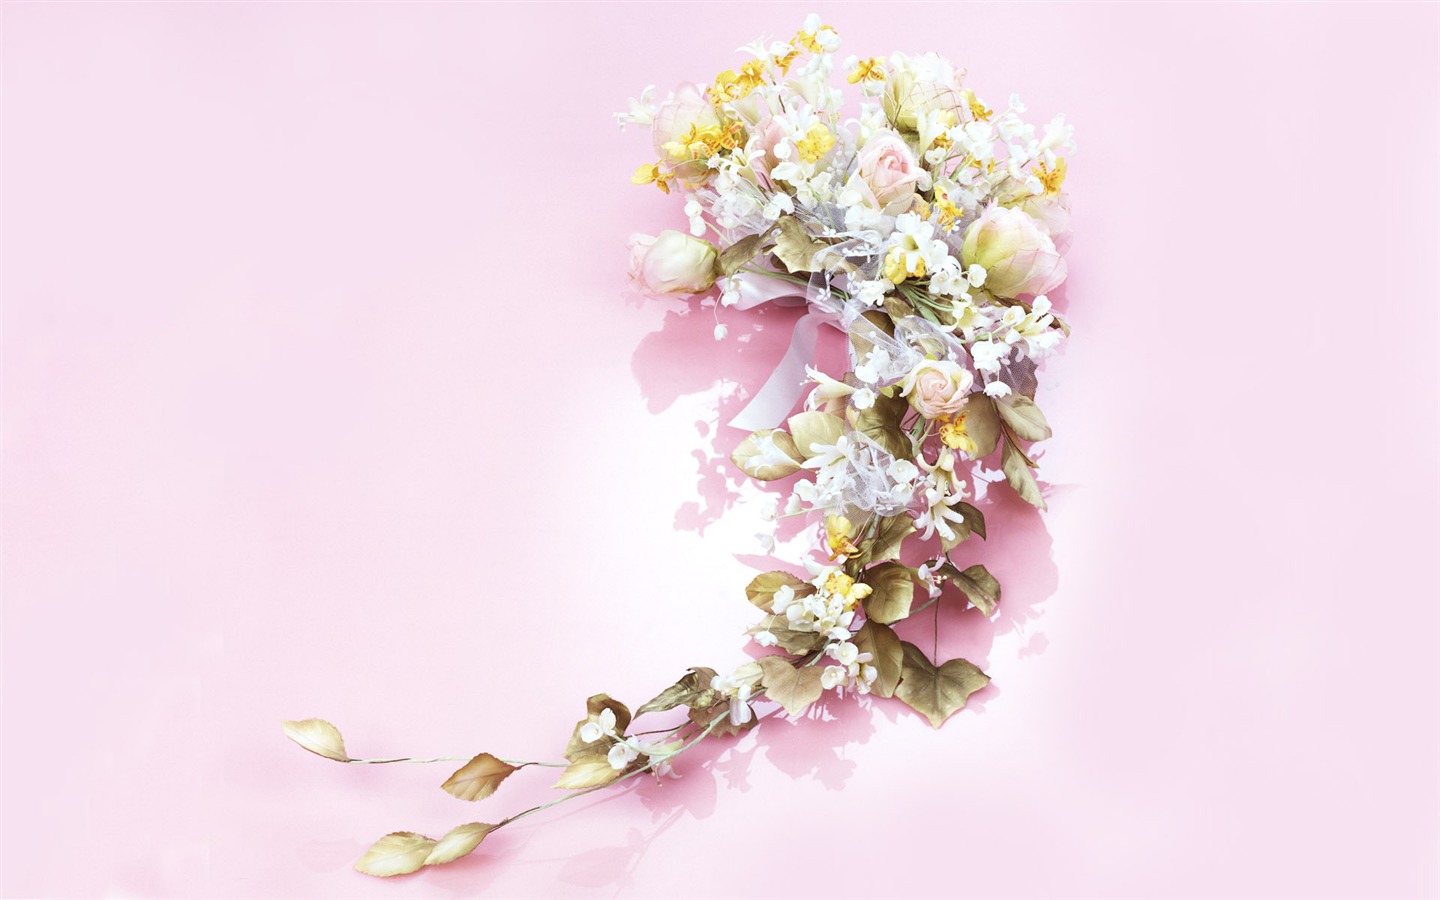 Wedding Flowers items wallpapers (2) #6 - 1440x900